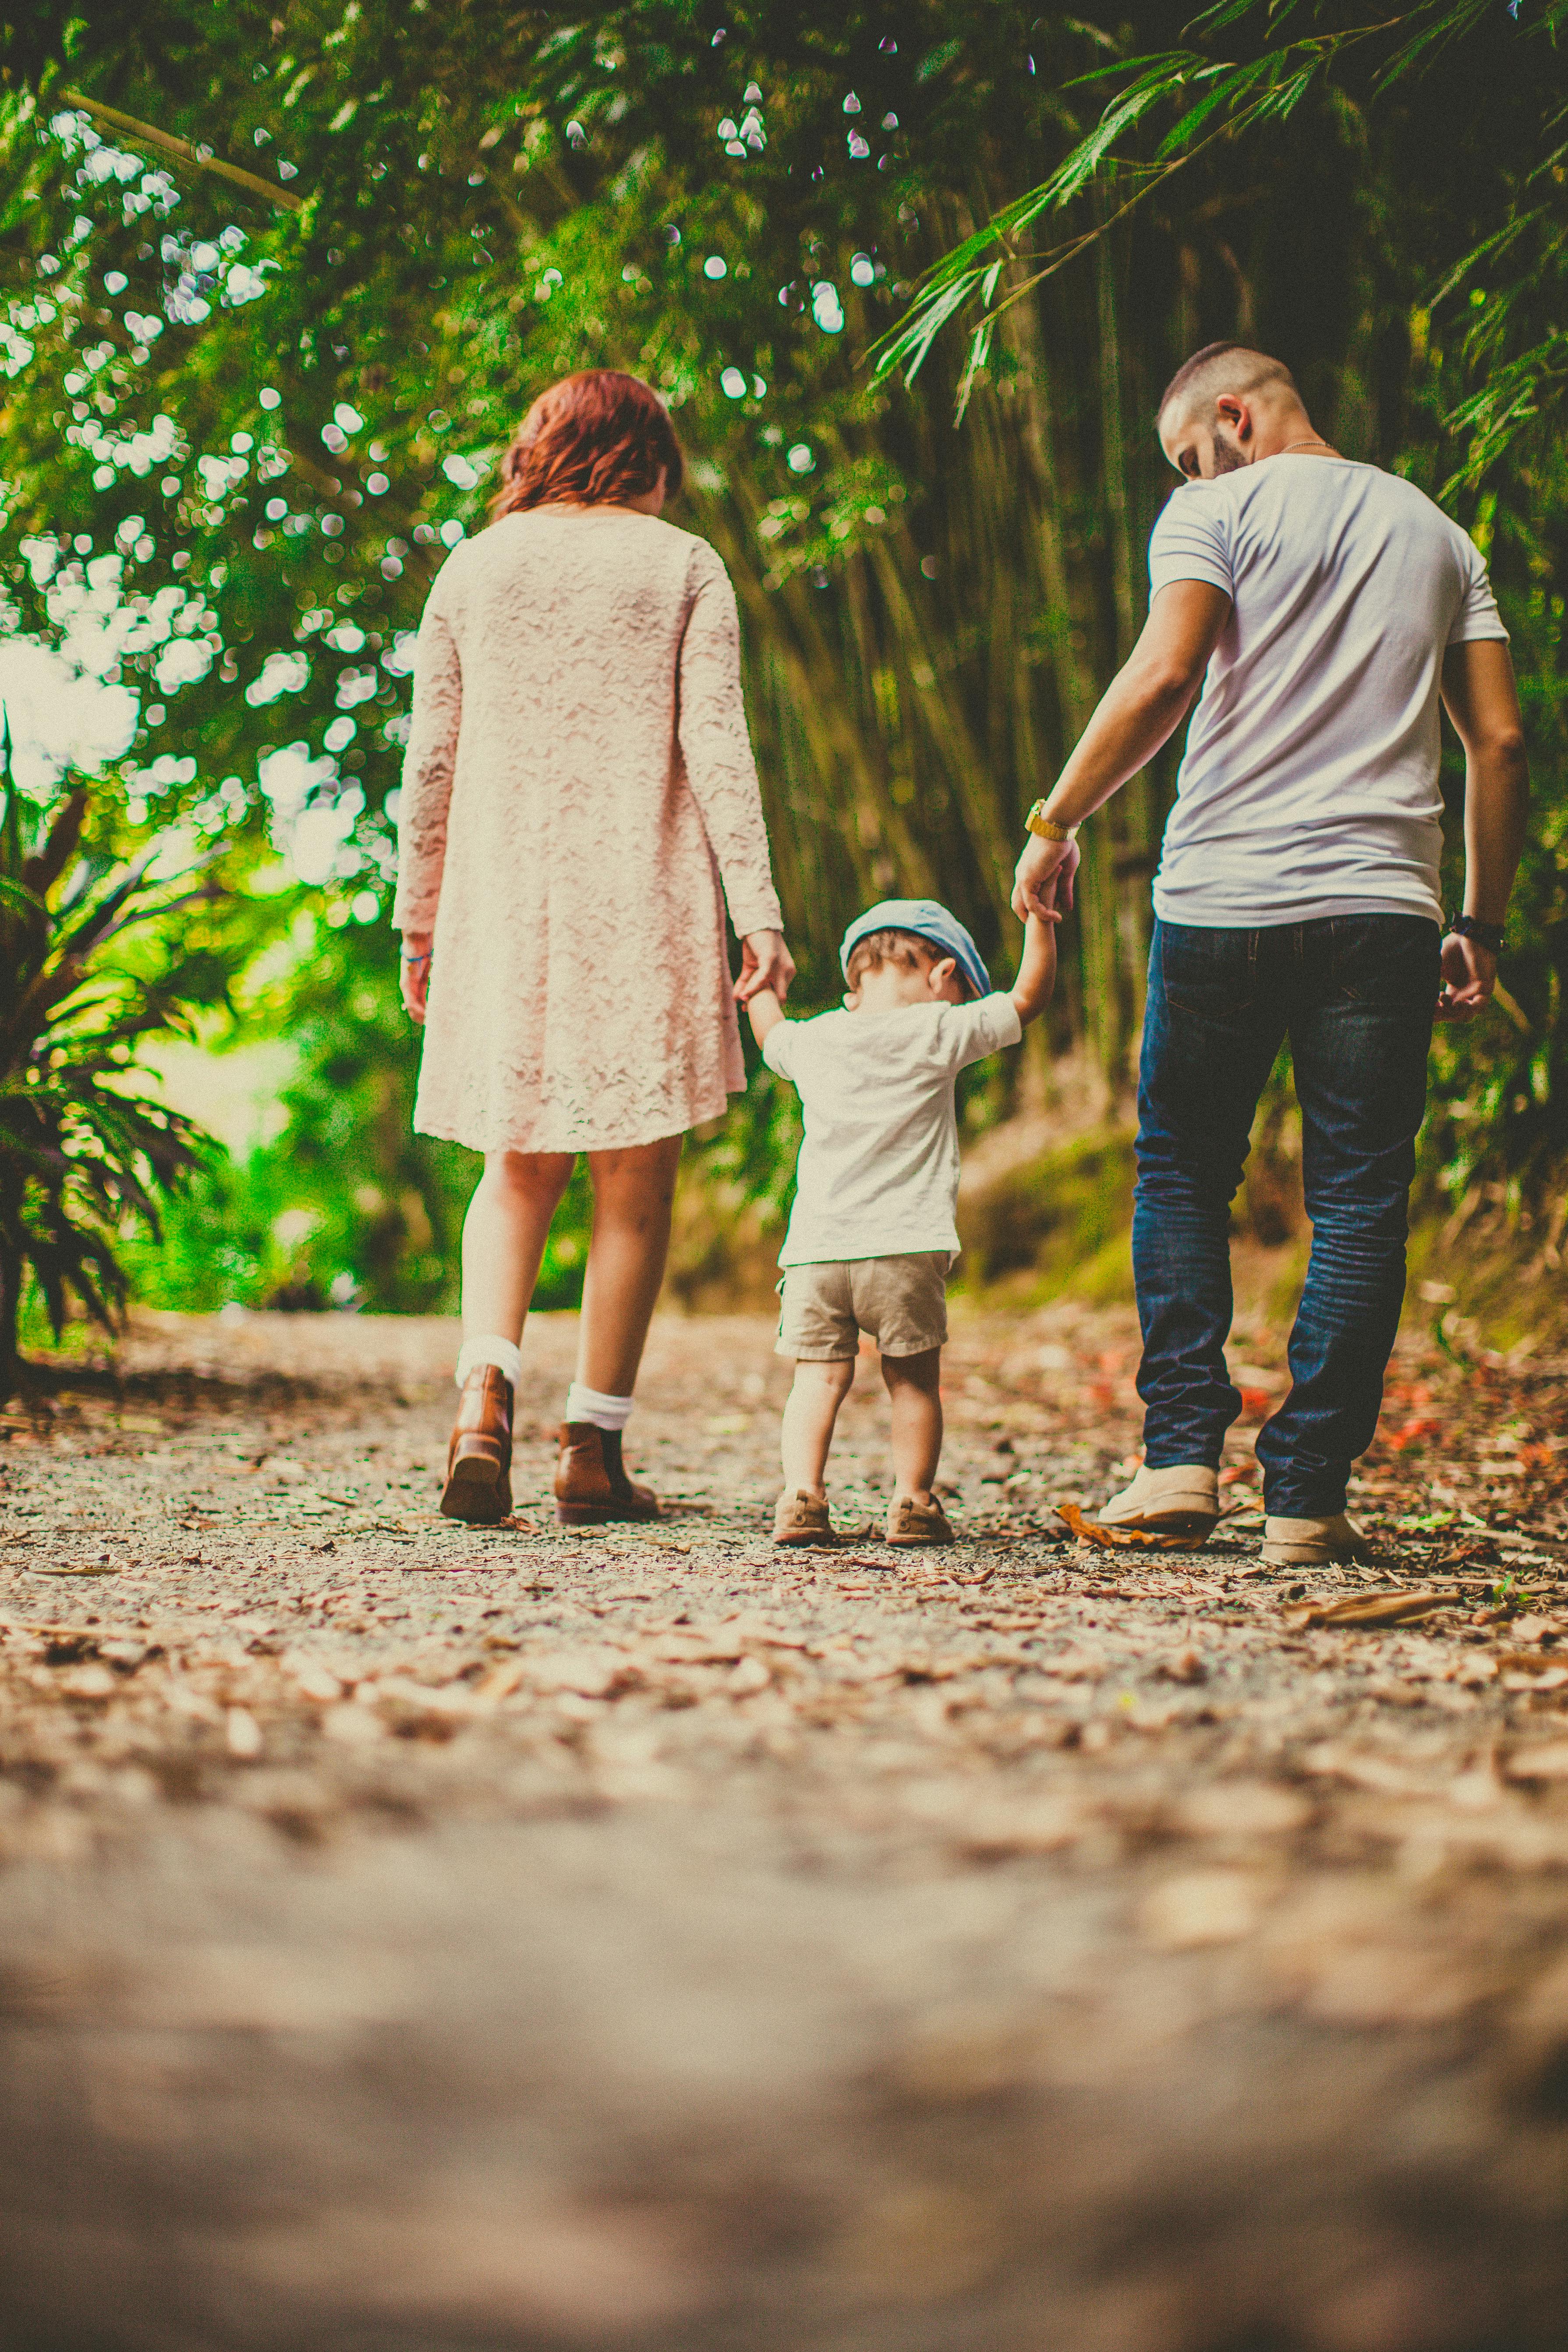 A couple taking a walk with their child | Source: Pexels